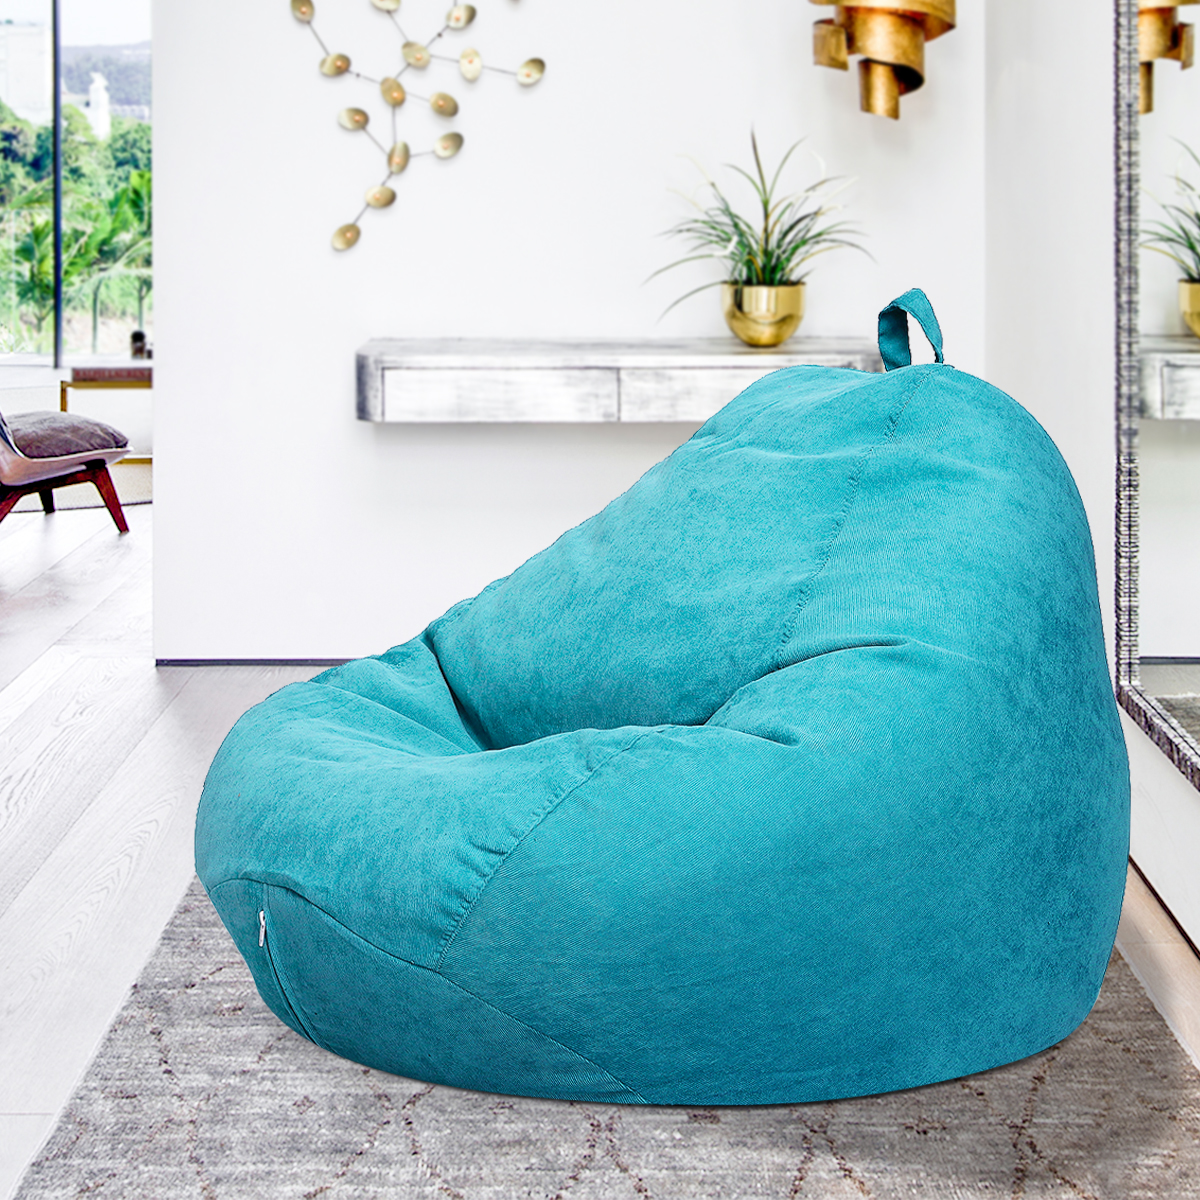 85x105CM Lazy Bean Bag Cover Seat Chair Indoor Corduroy Home 24